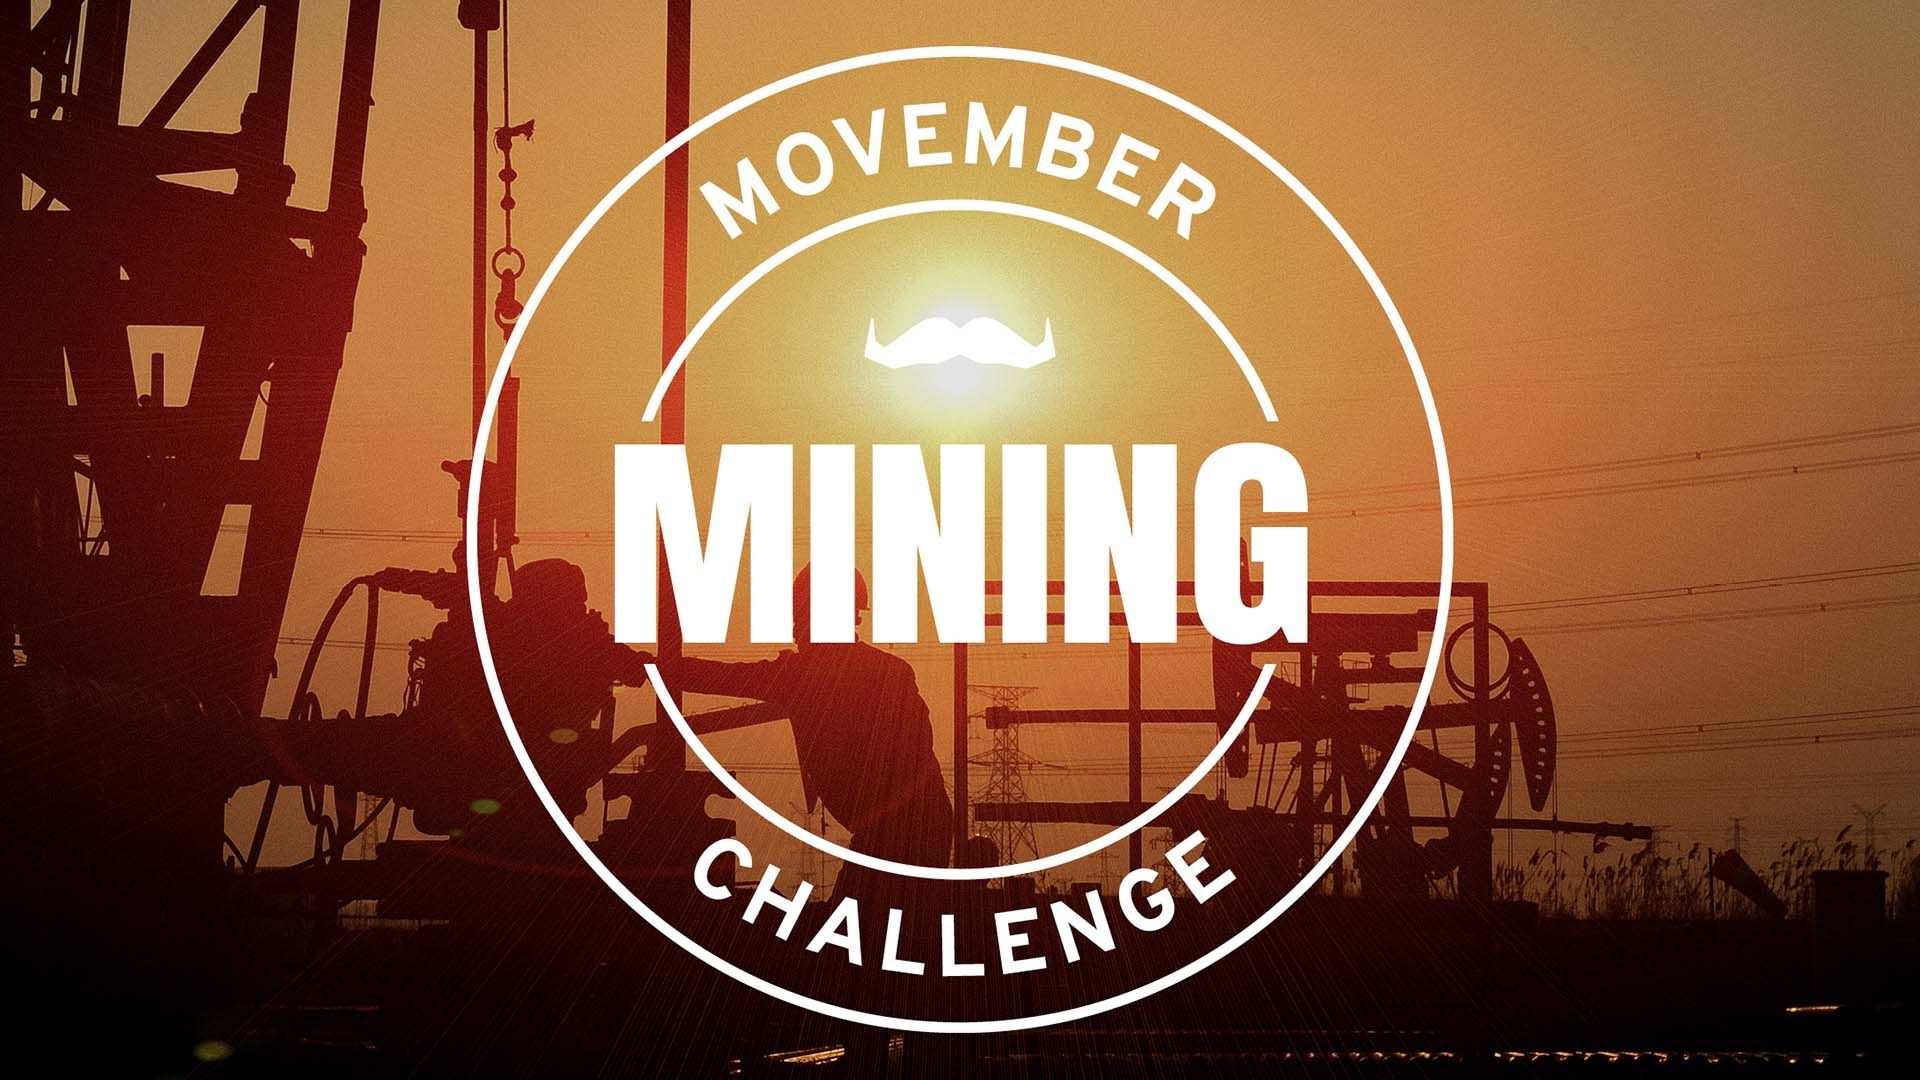 Photo of silhouetted figures at sunset, working on with heavy mining equipment. A surmounted logo says: "Movember Mining Challenge"